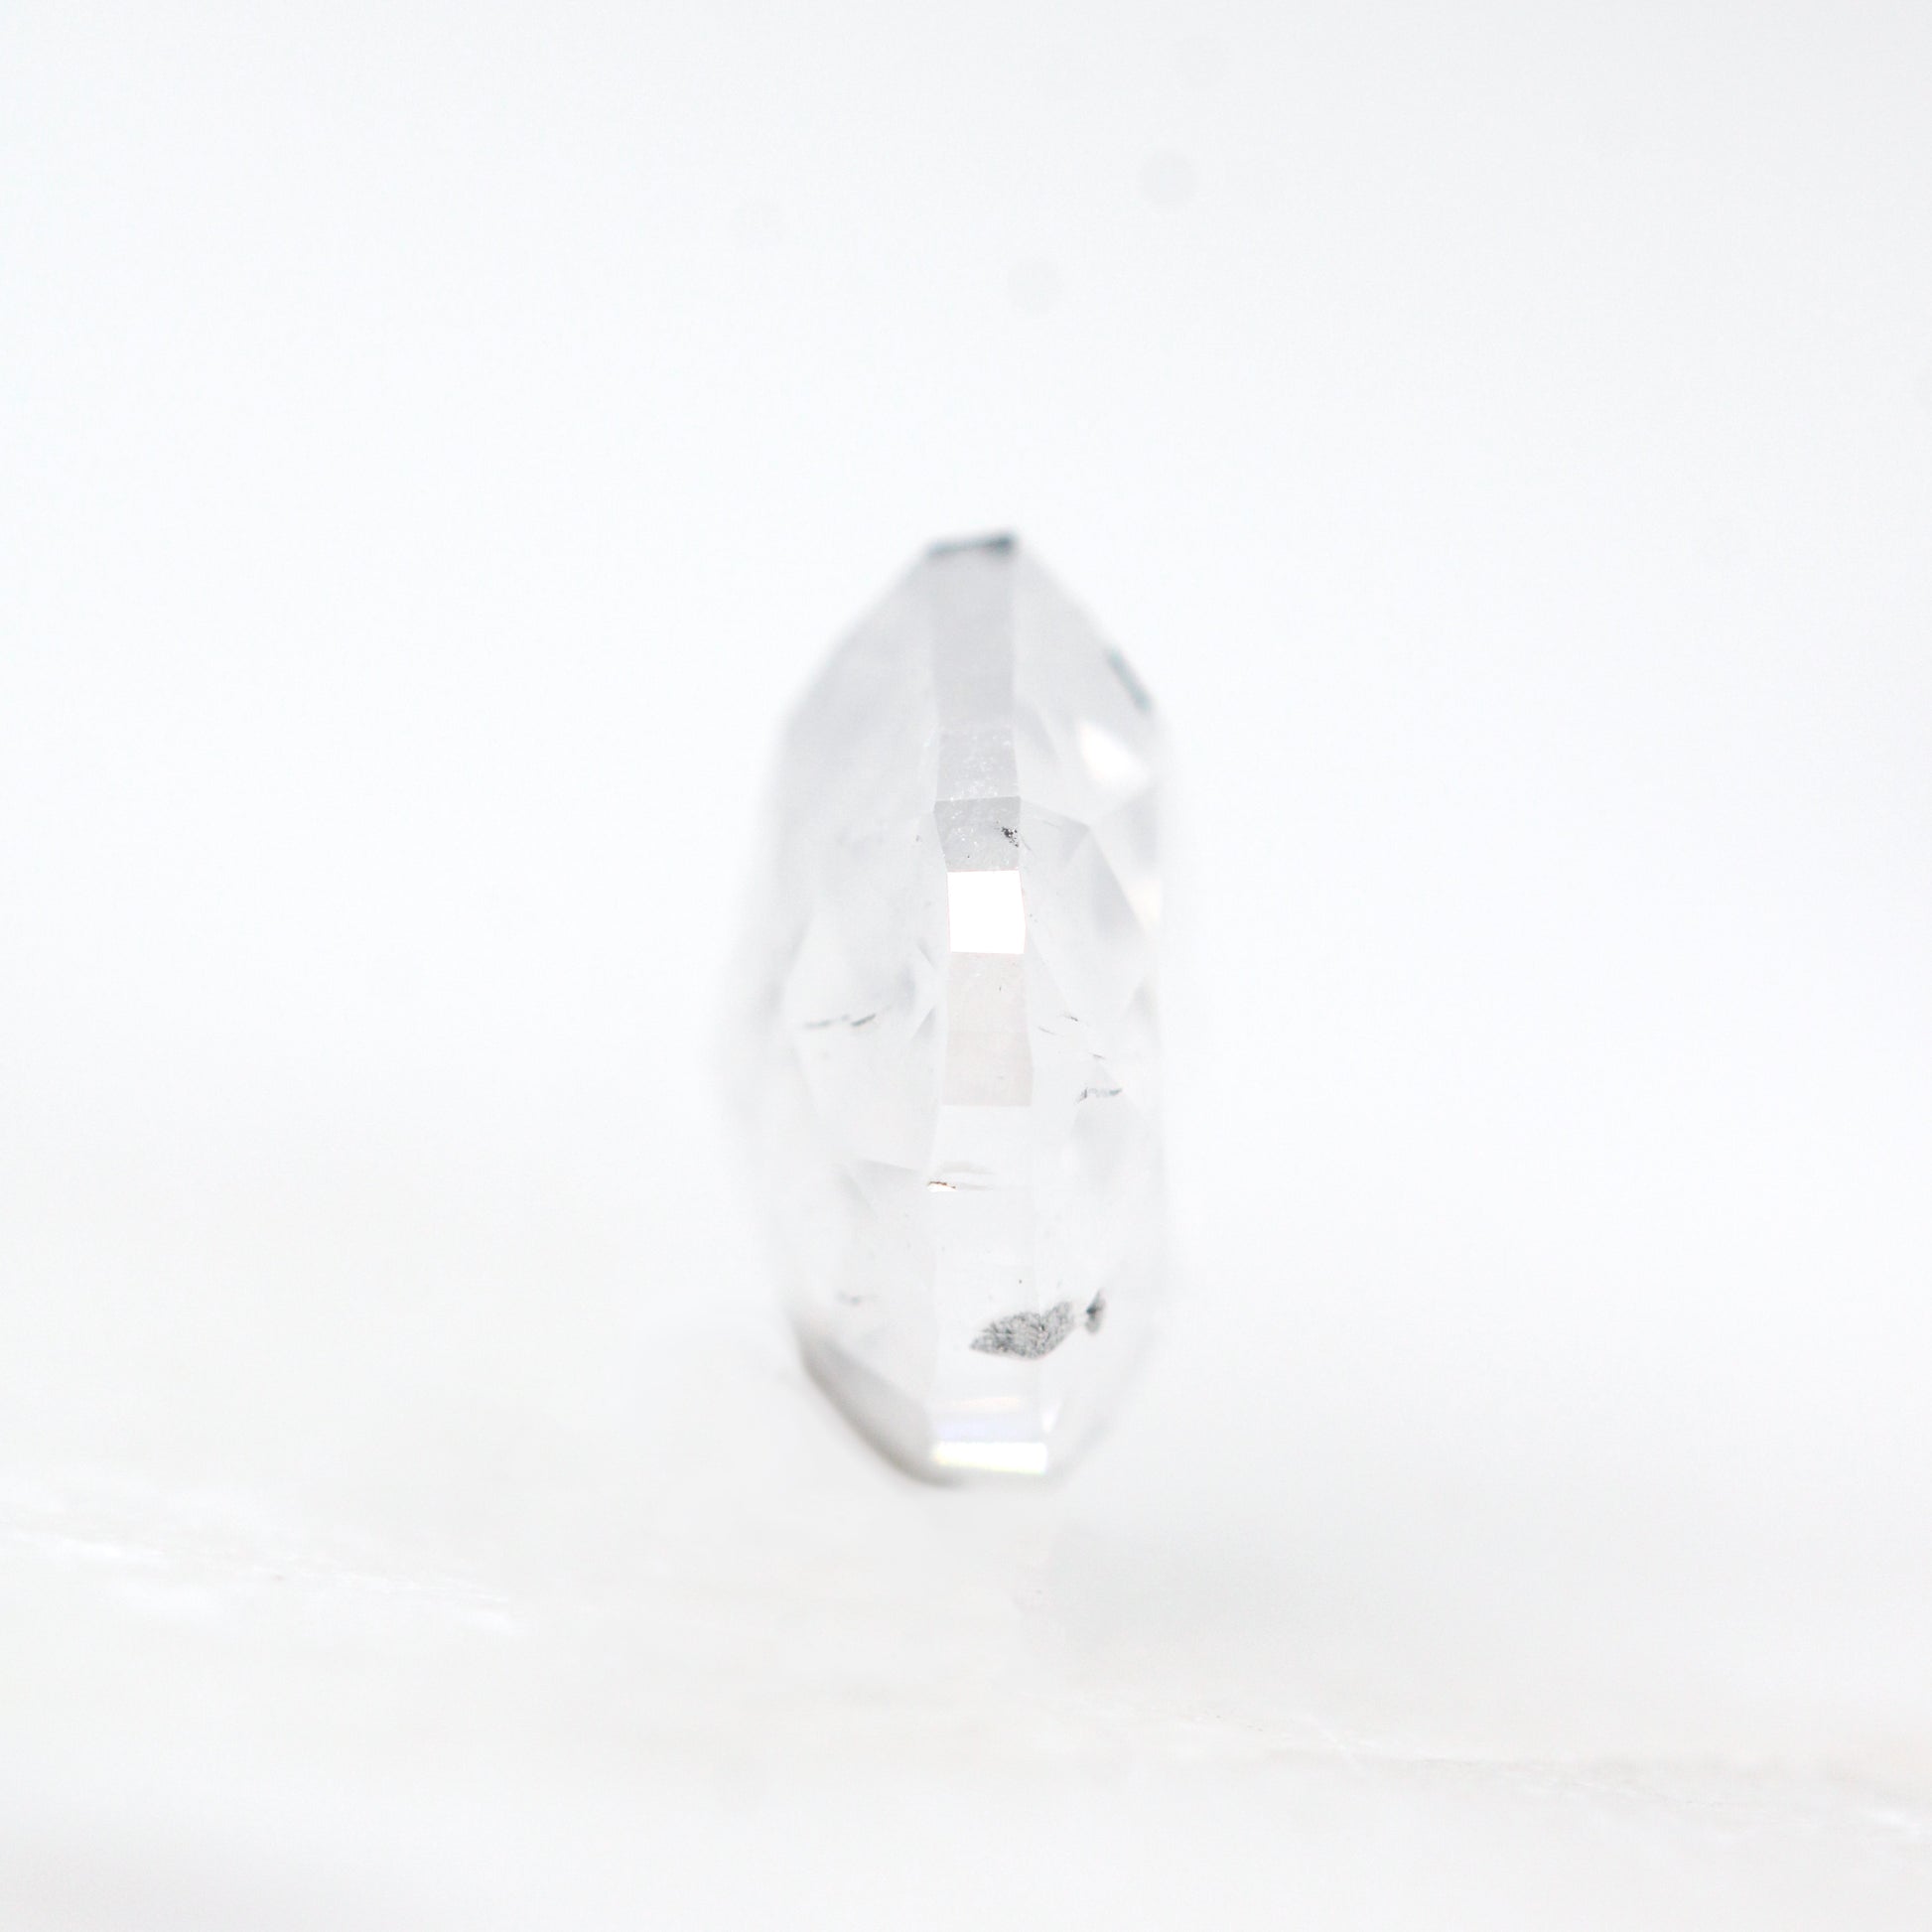 2.15 Carat Clear Celestial Pear Diamond for Custom Work - Inventory Code CCP215 - Midwinter Co. Alternative Bridal Rings and Modern Fine Jewelry